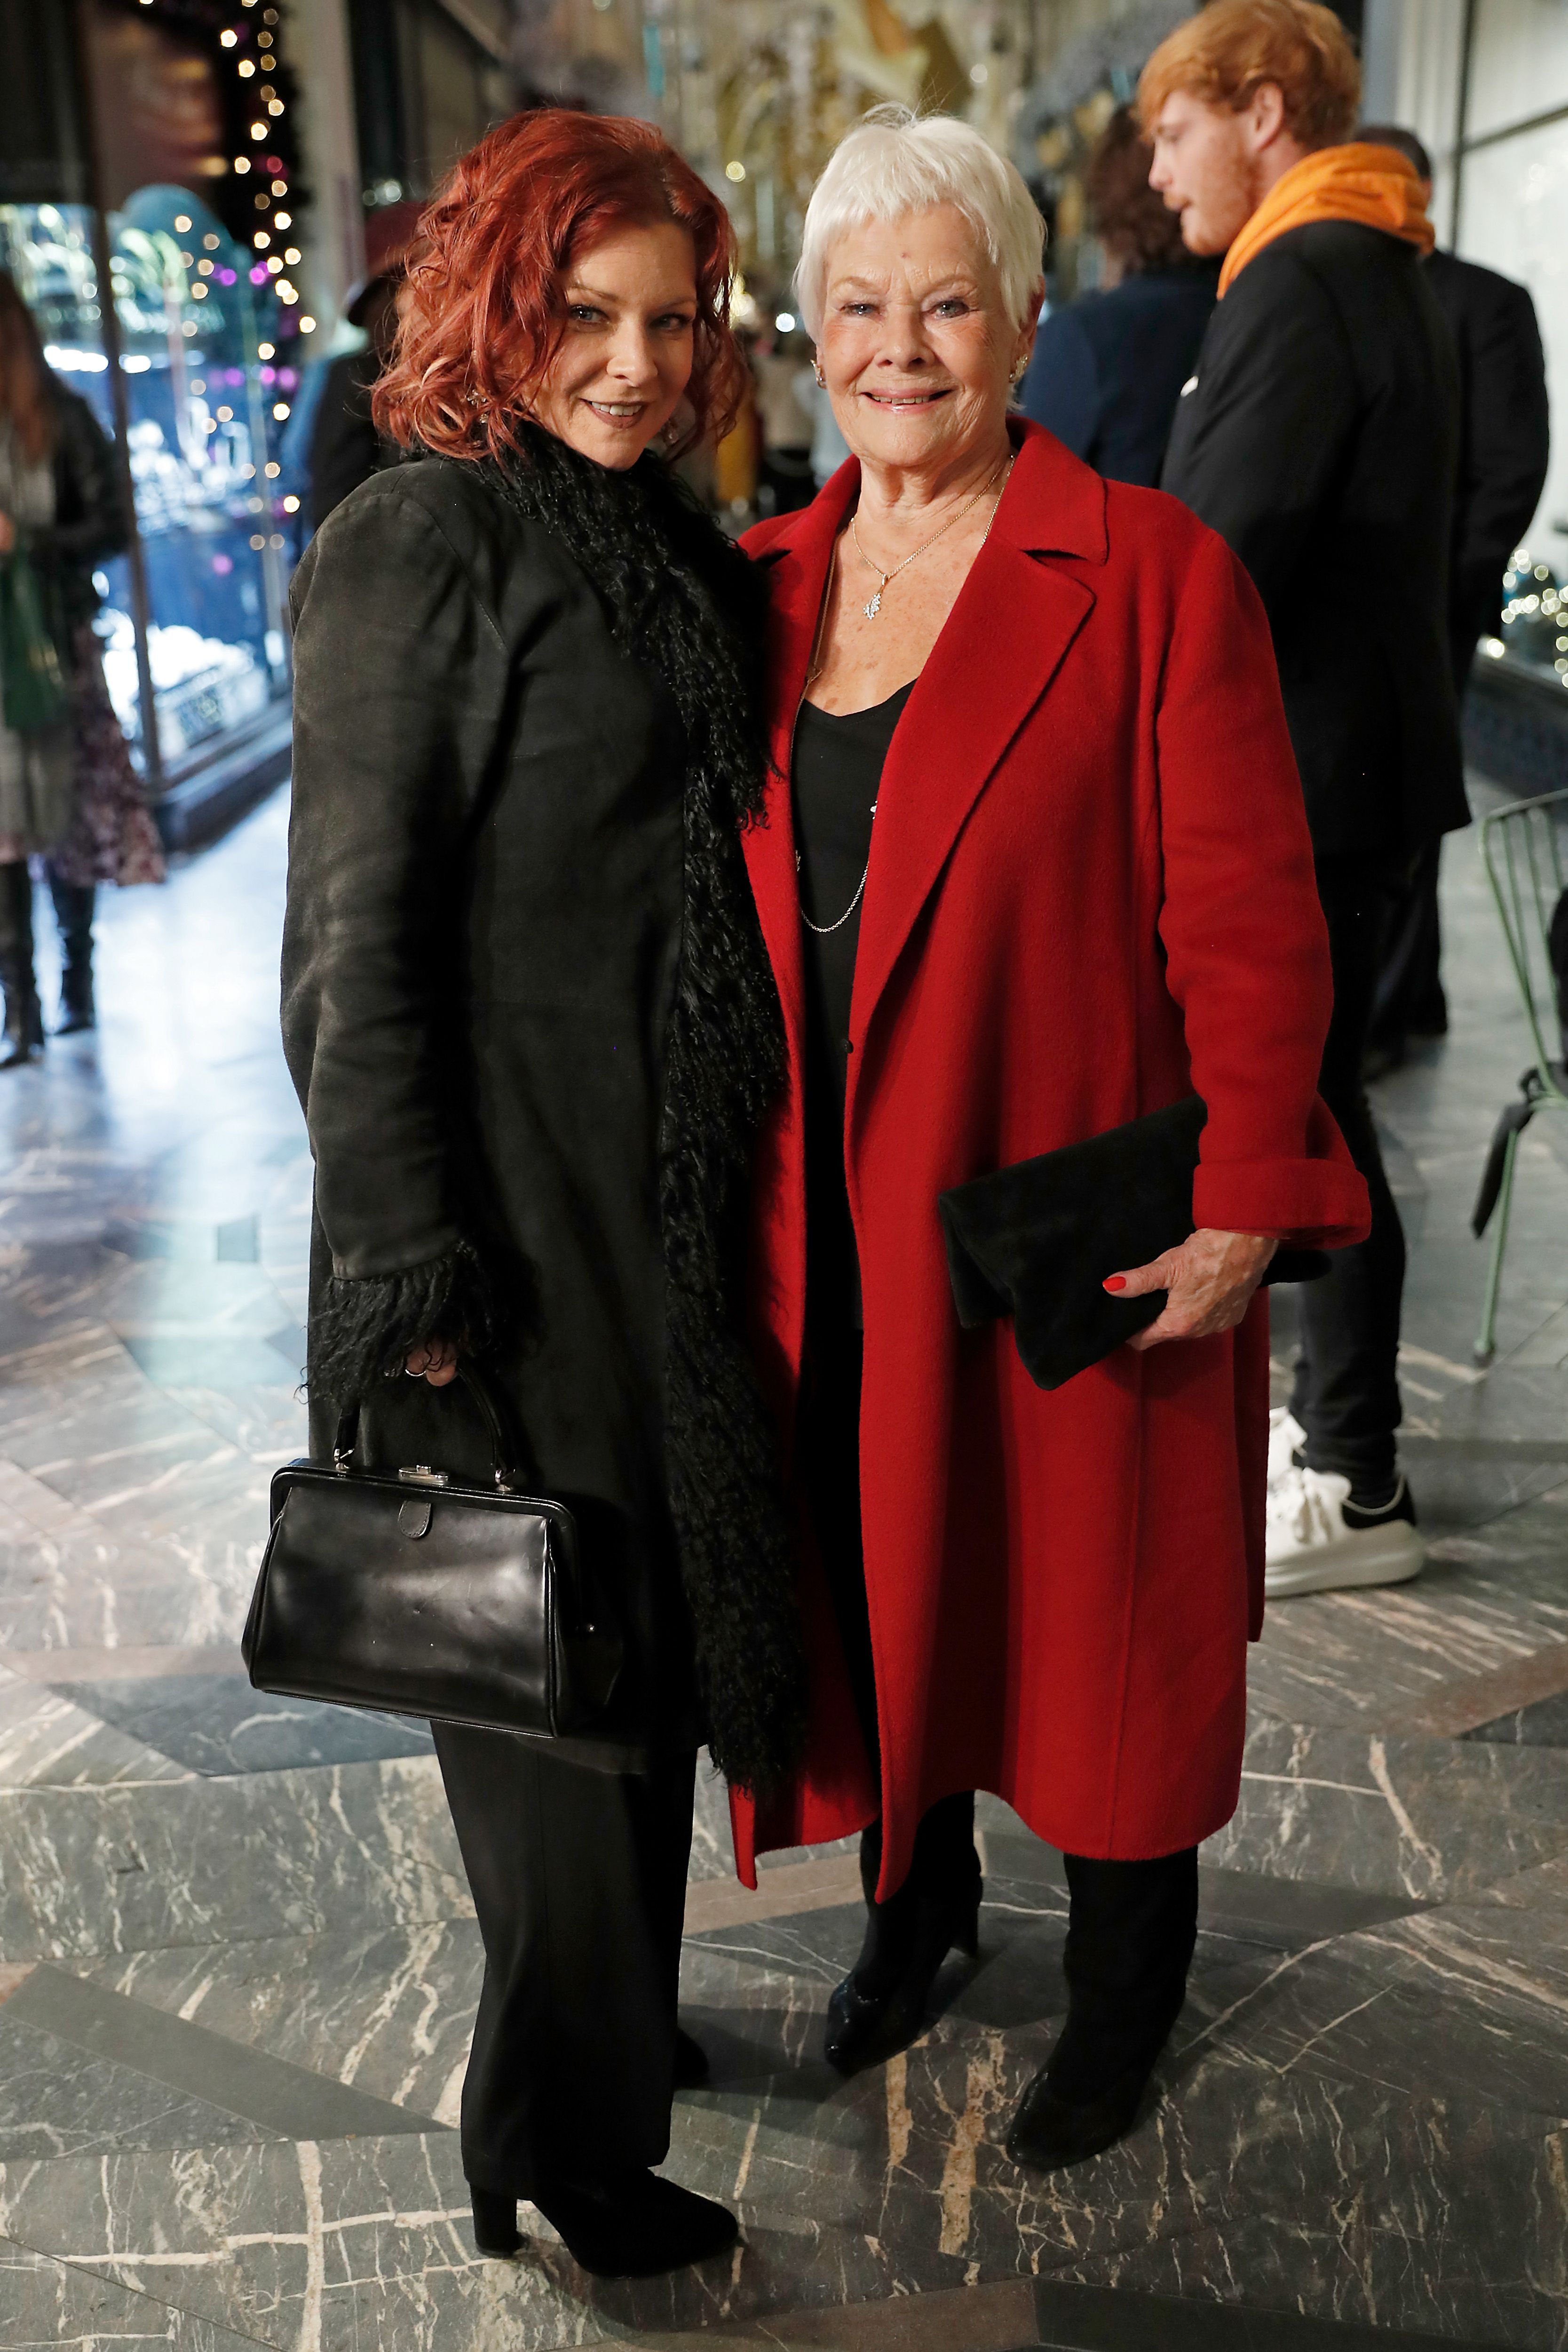 Judi Dench and her daughter, actress Finty Williams, at the event celebrating the 200th Burlington Christmas in 2019 in London, England | Source: Getty Images